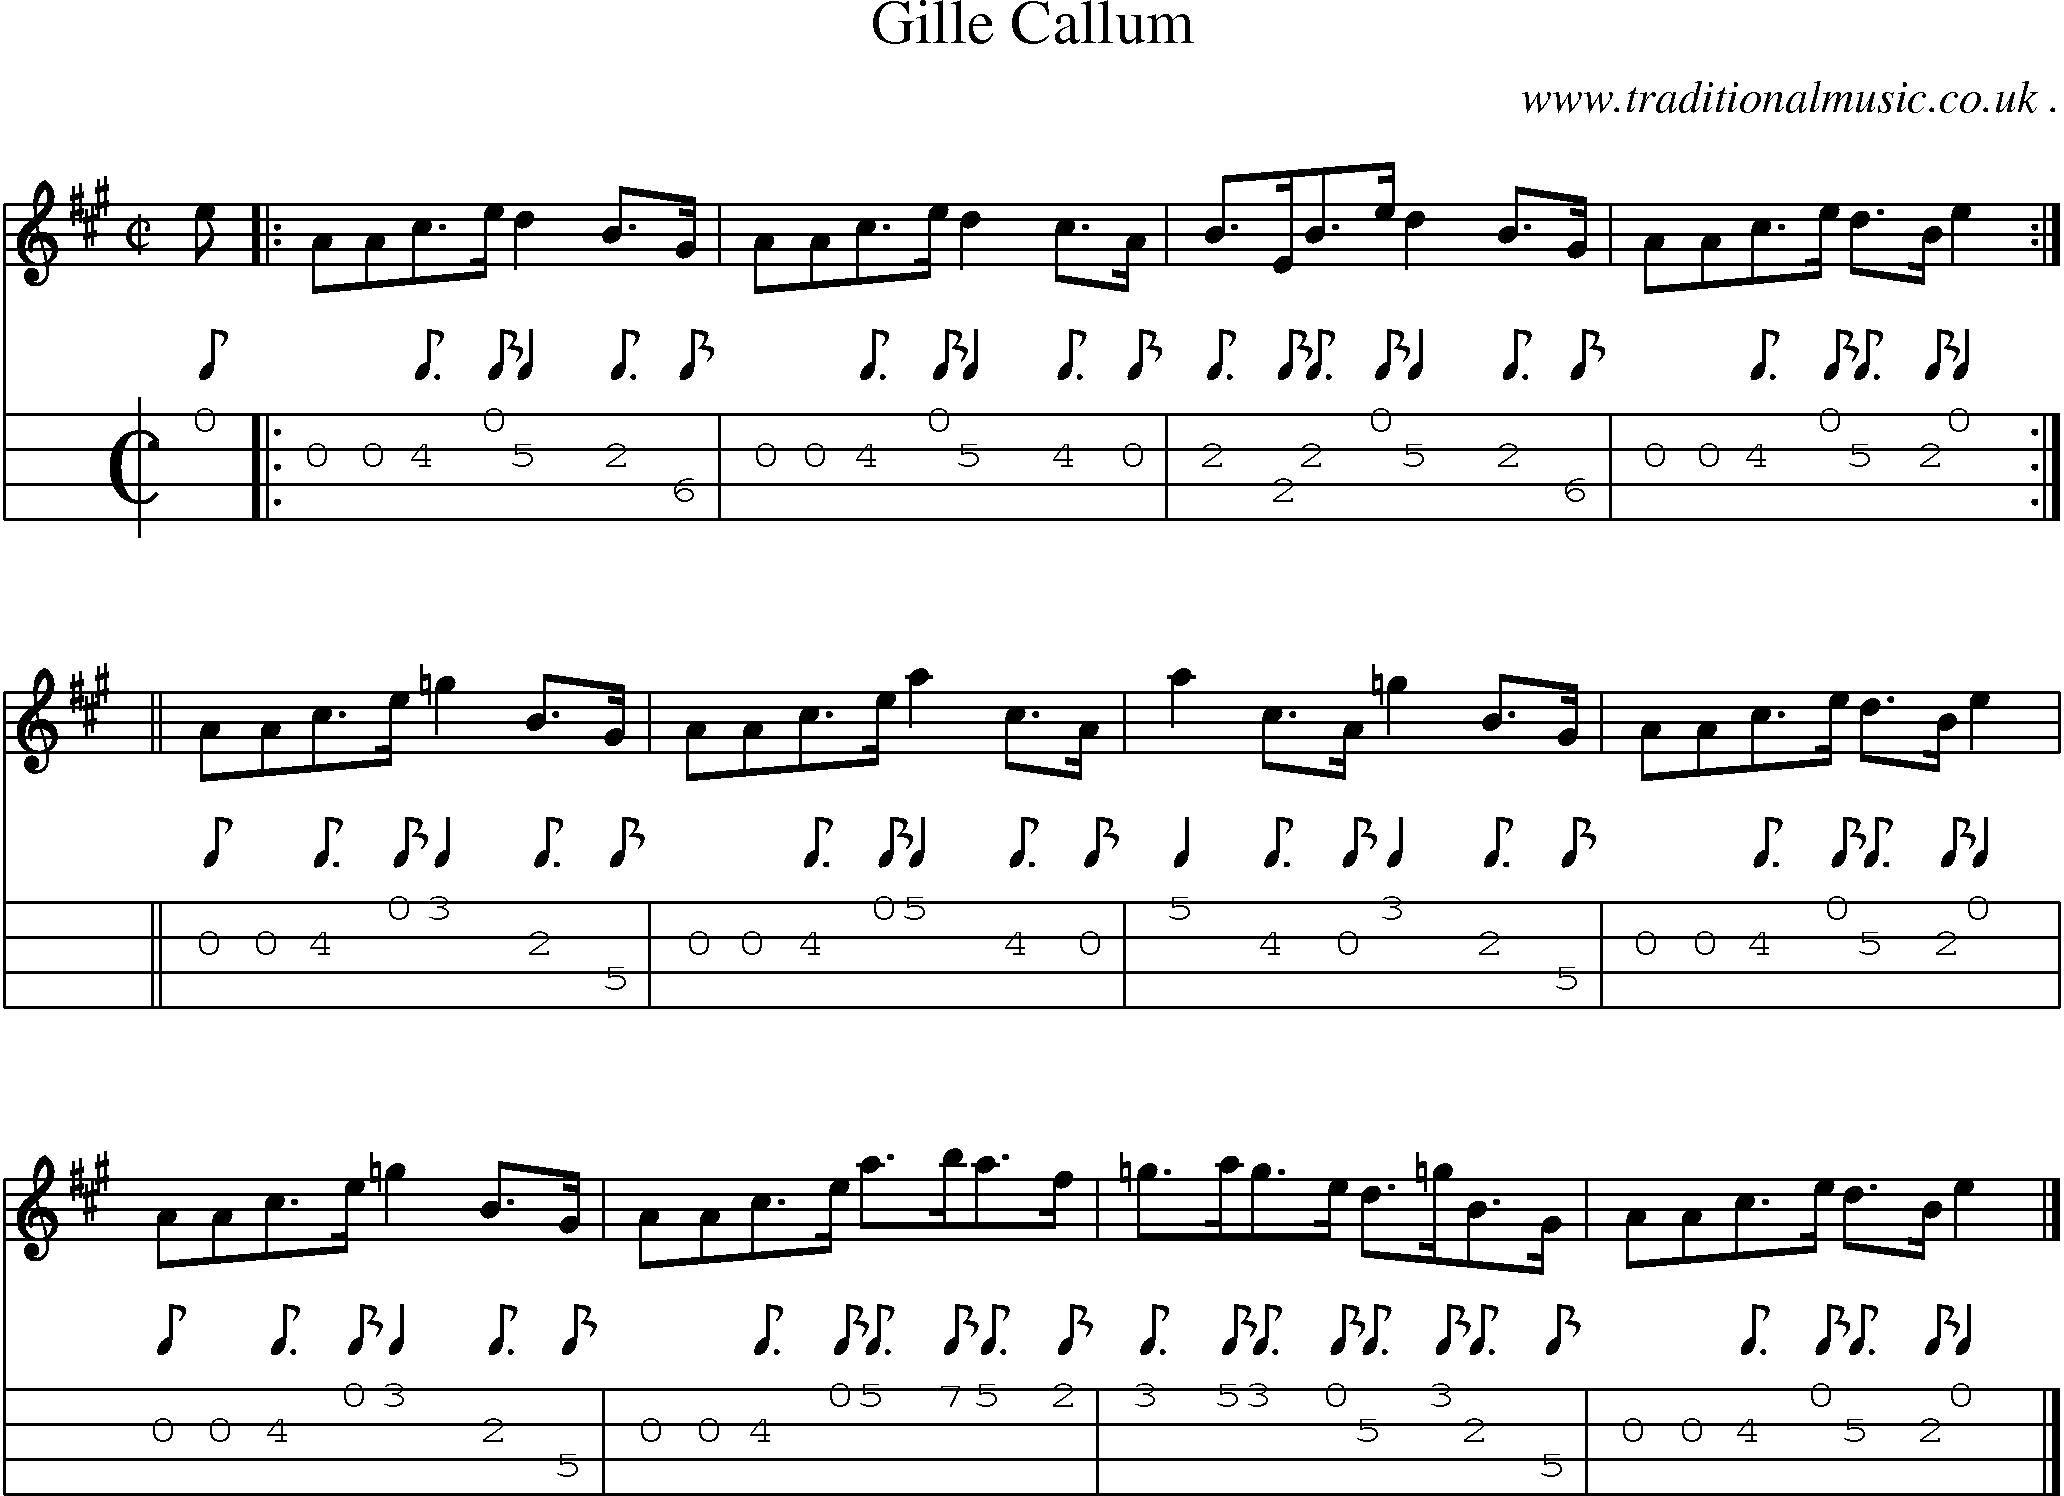 Sheet-music  score, Chords and Mandolin Tabs for Gille Callum